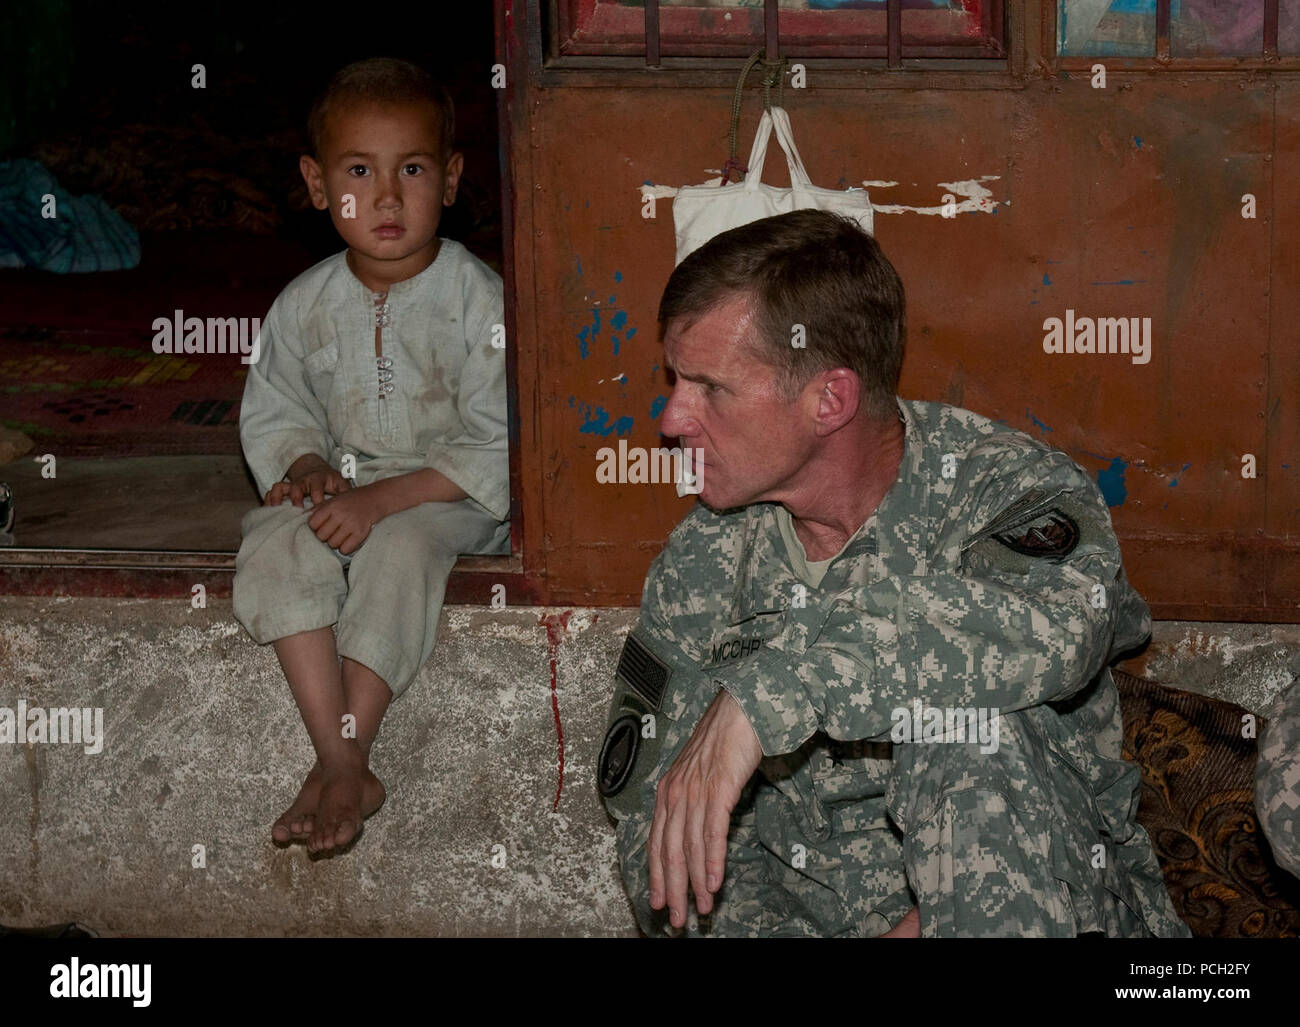 An Afghan boy observes a meeting between U.S. Army Gen. Stanley A. McChrystal, commander of NATO's International Security Assistance Force and U.S. Forces-Afghanistan, and village elders. Stock Photo